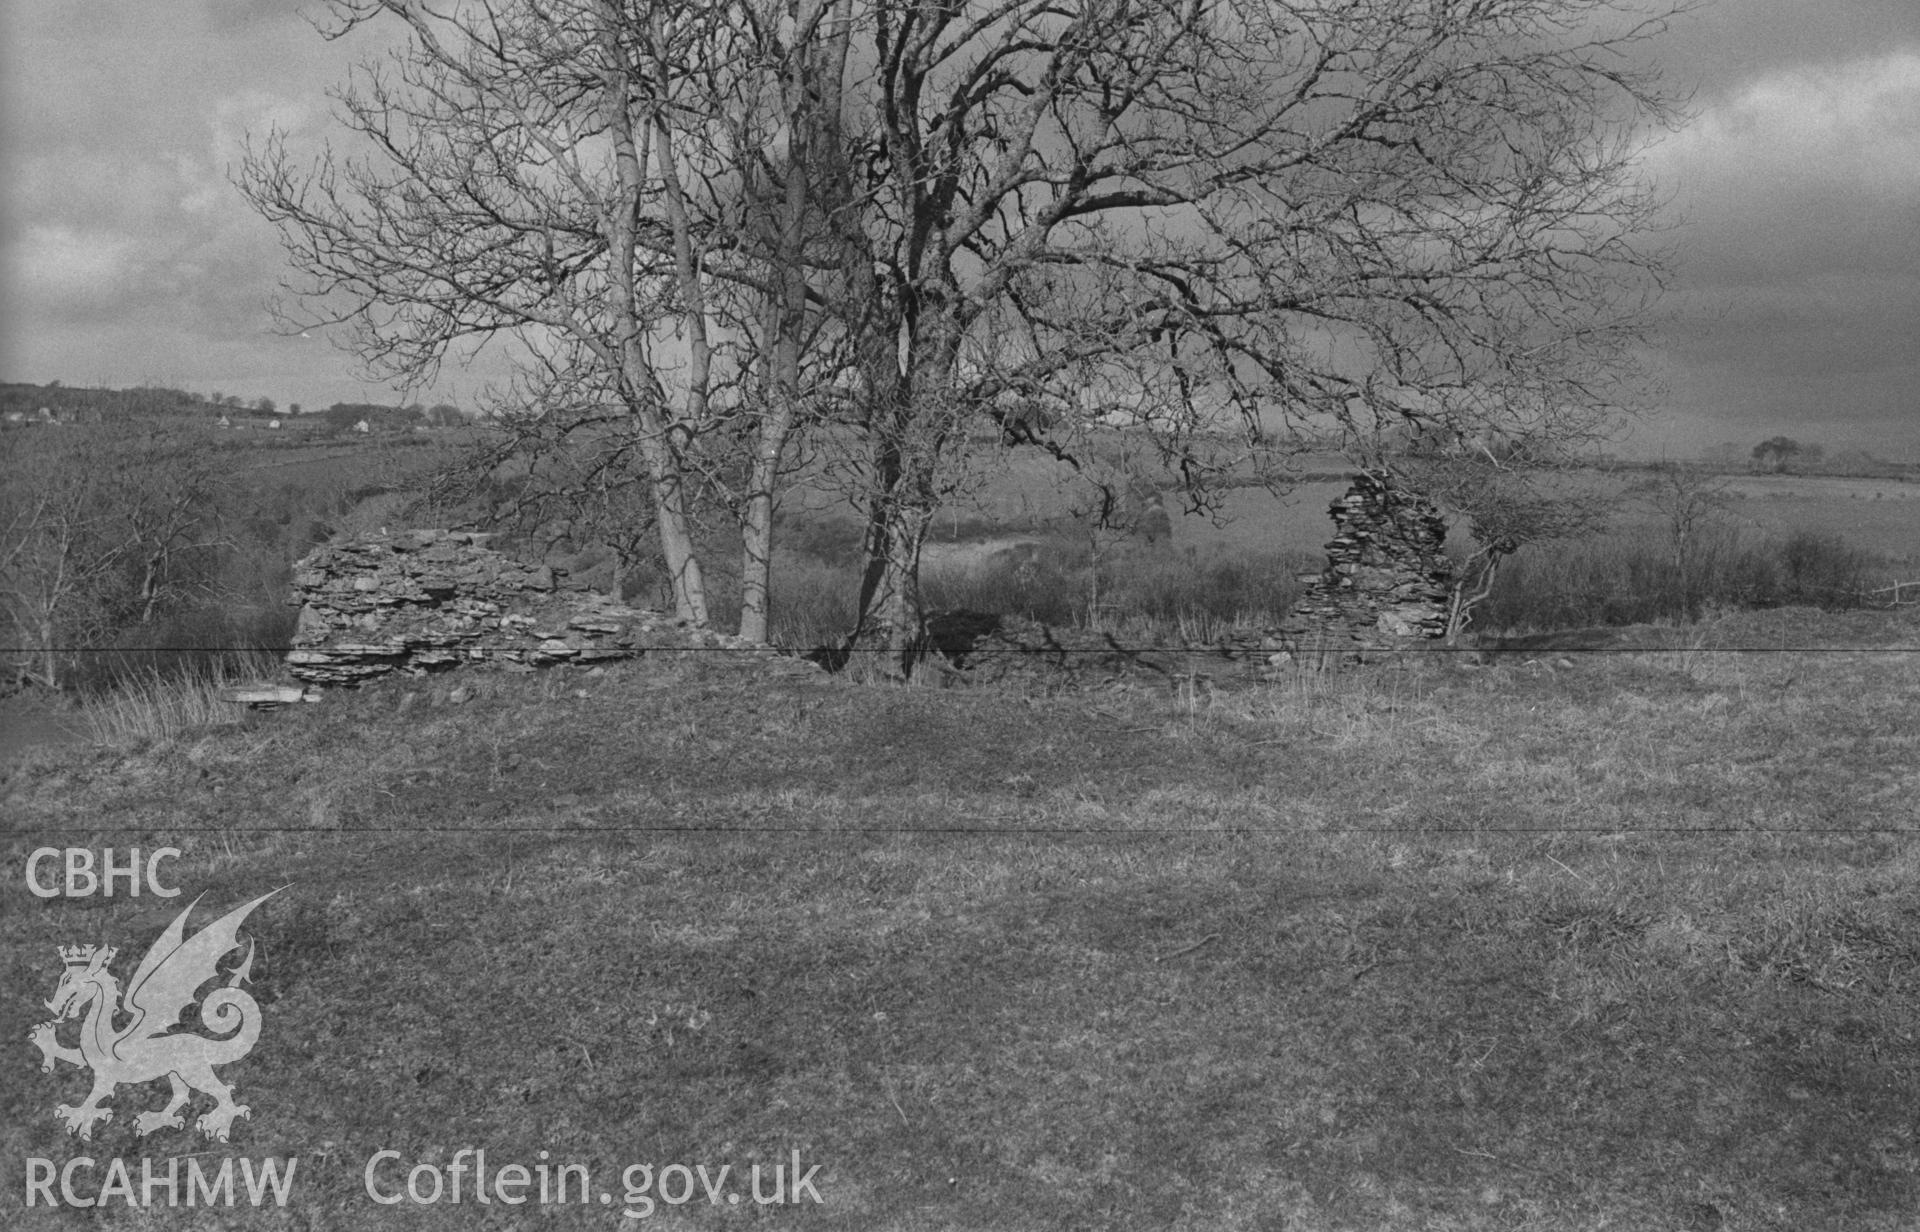 Digital copy of a black and white negative showing ruin of St. Mary's church, Llanfair Trefhelygen. Photographed in April 1963 by Arthur O. Chater from Grid Reference SN 3436 4413, looking east north east.